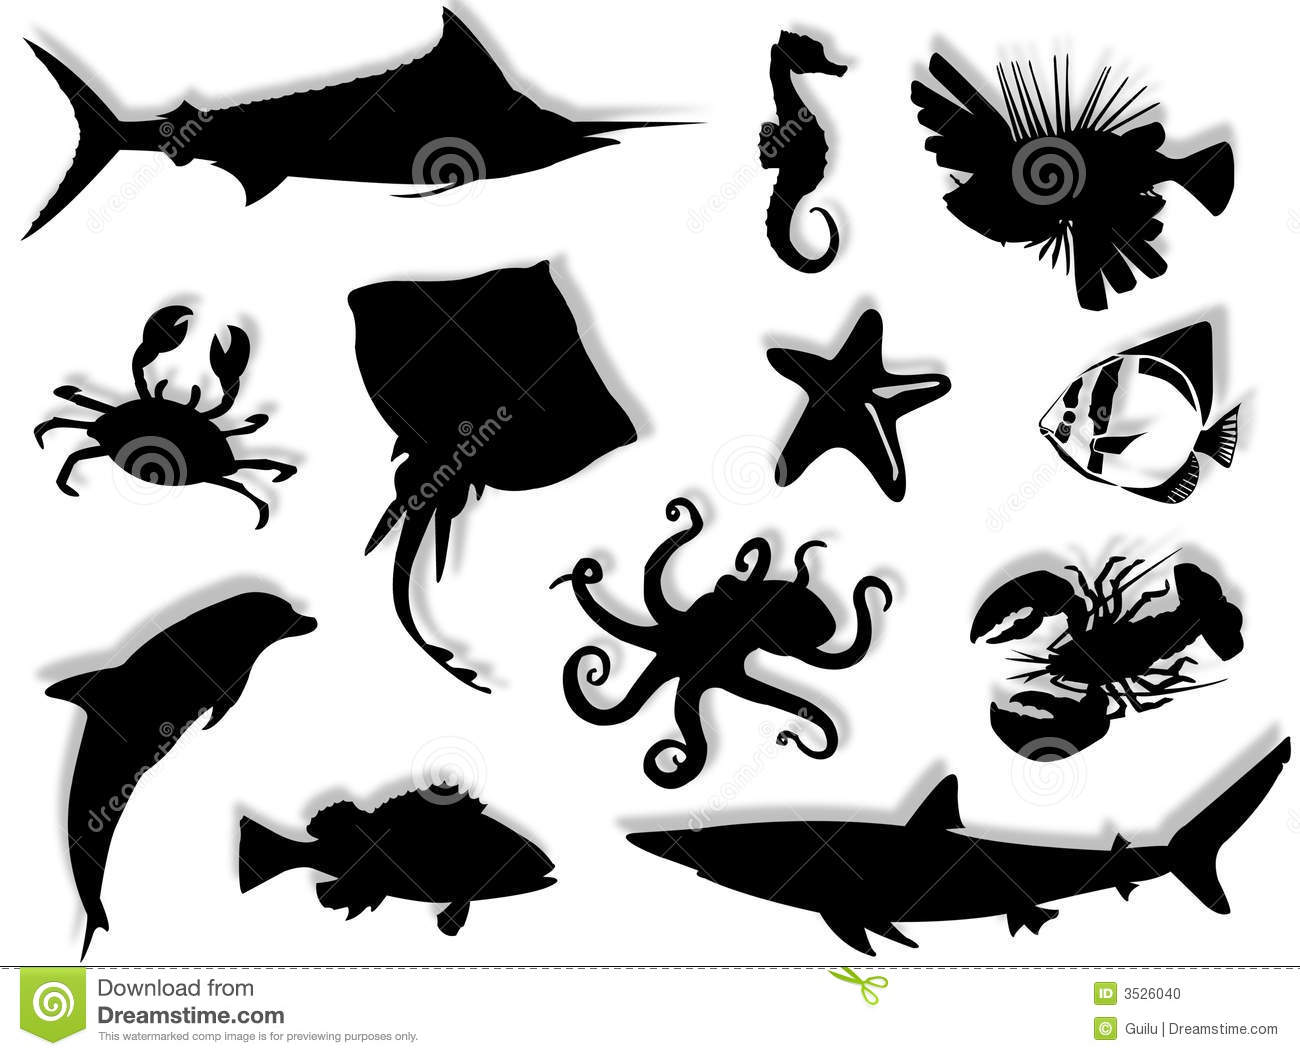 Sea Life Black Silhouette For This Sea Life Background